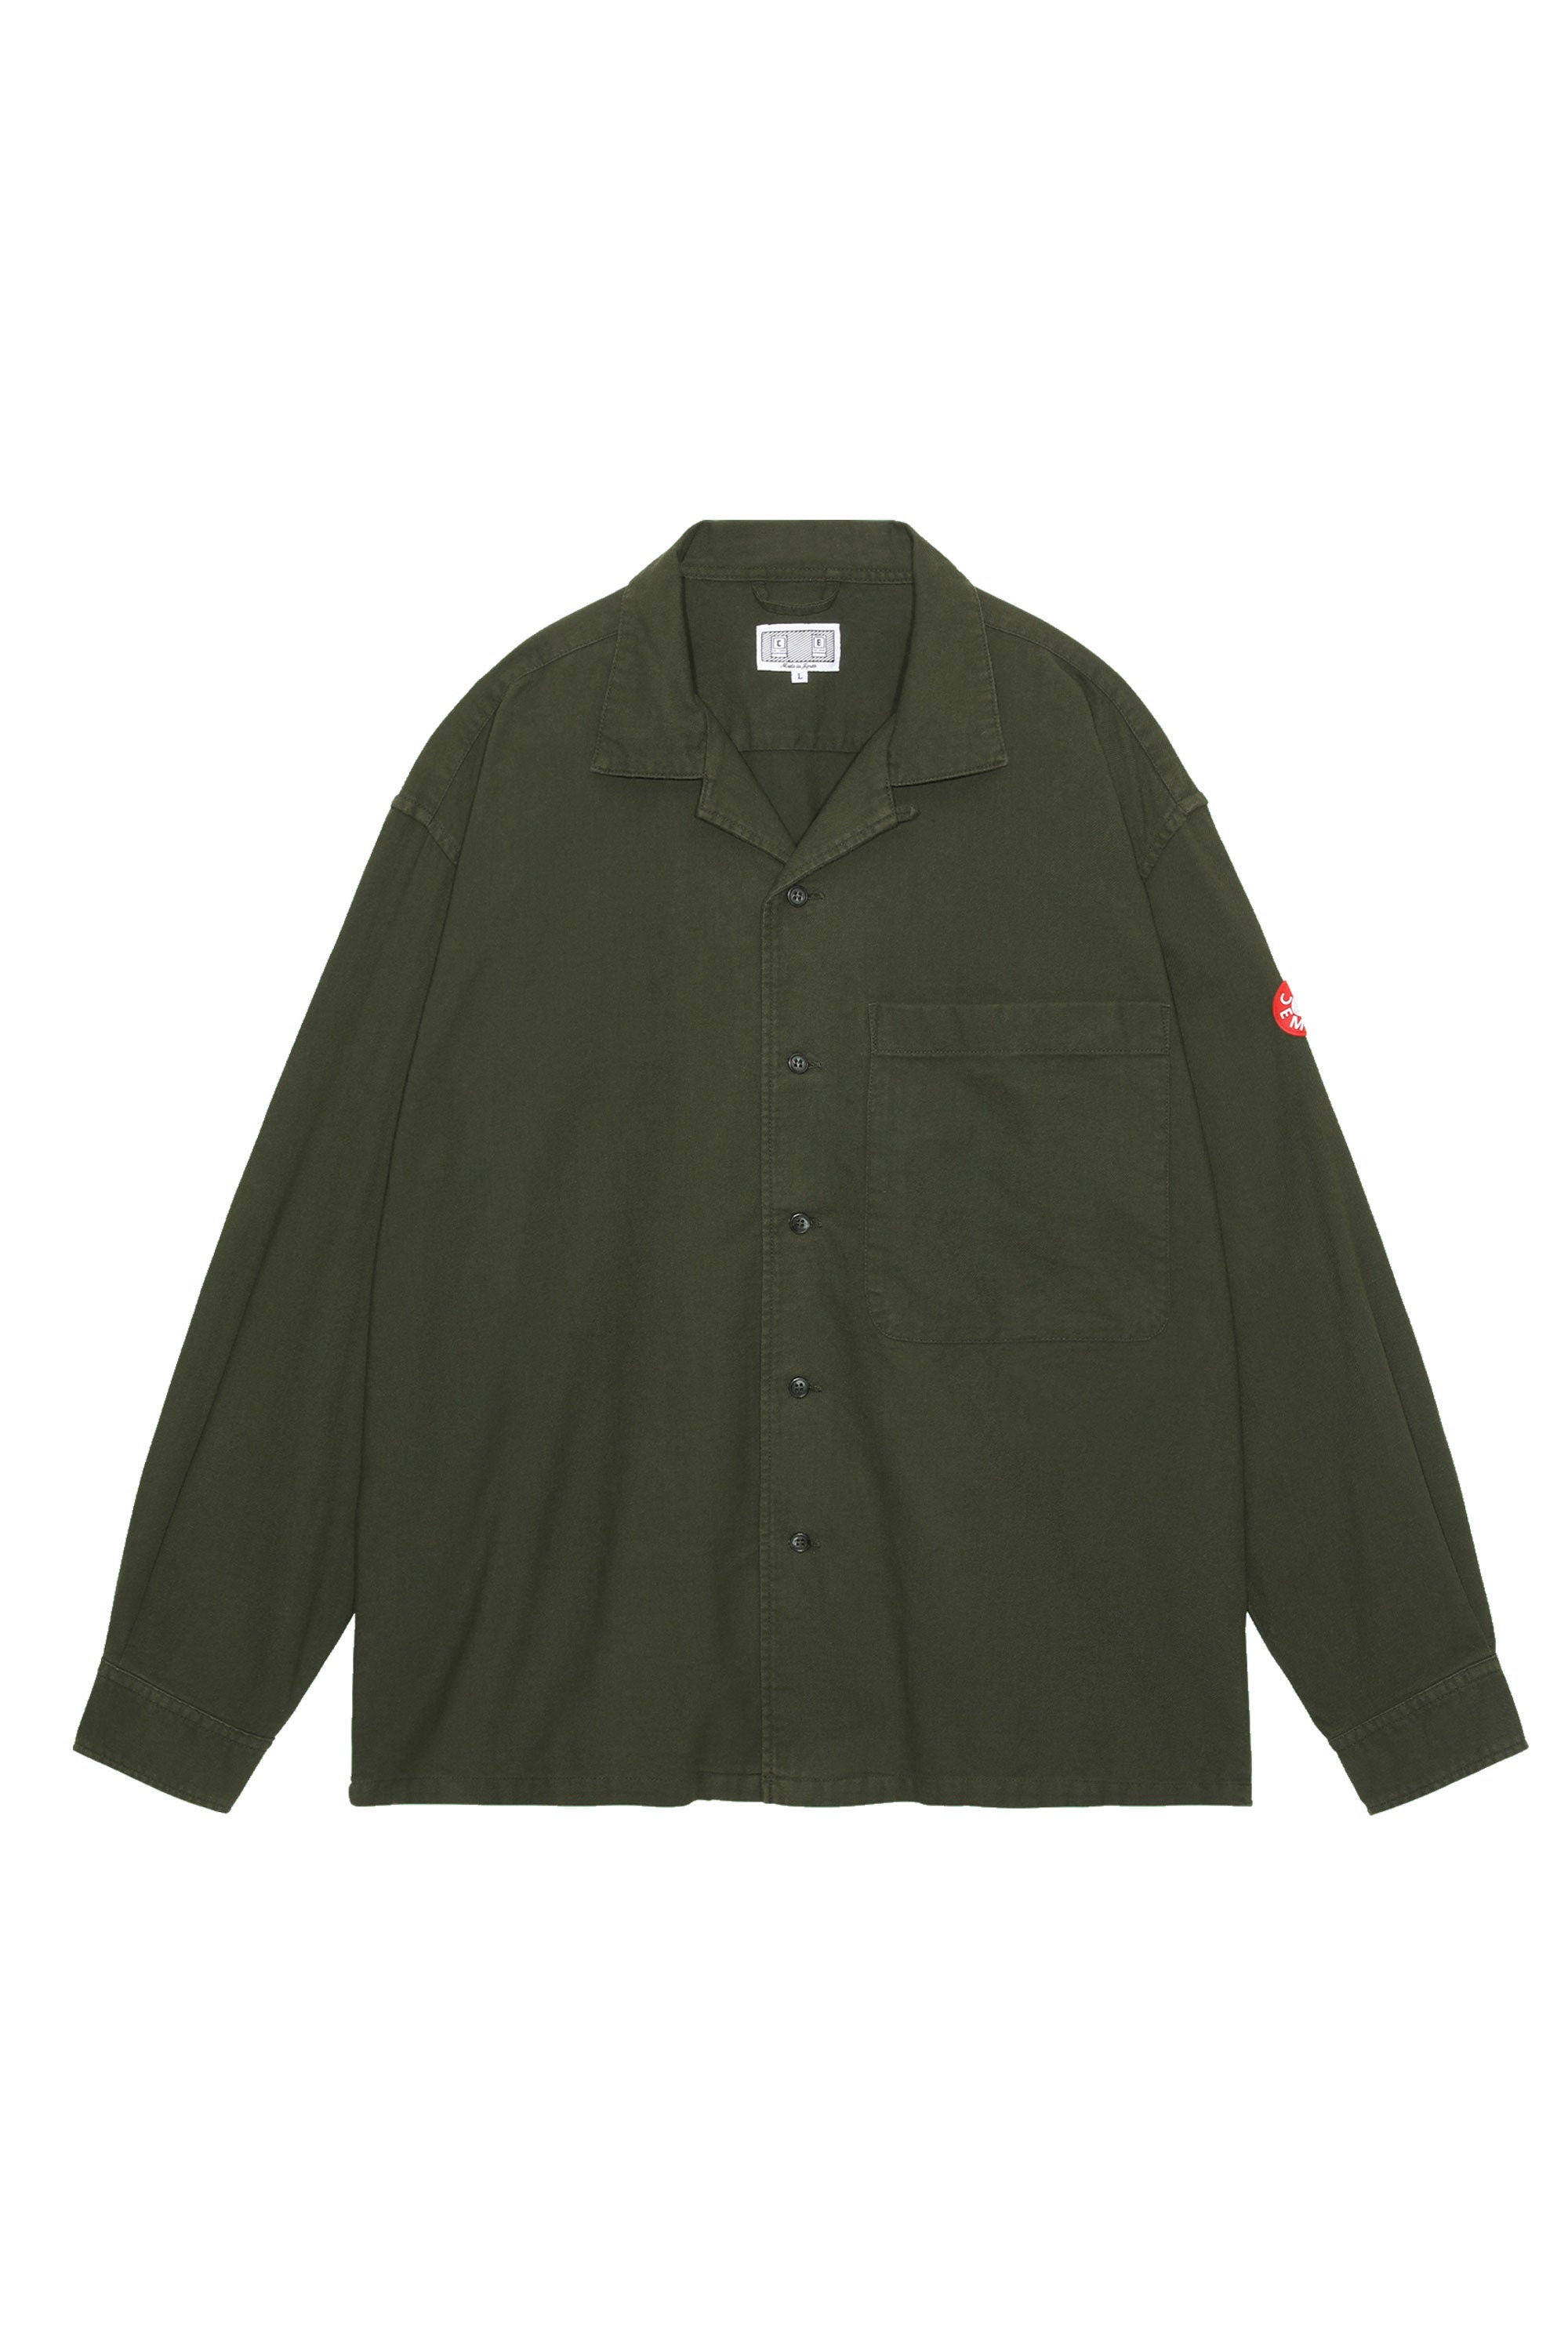 The CAV EMPT - COTTON LPOC OPEN SHIRT GREEN available online with global shipping, and in PAM Stores Melbourne and Sydney.